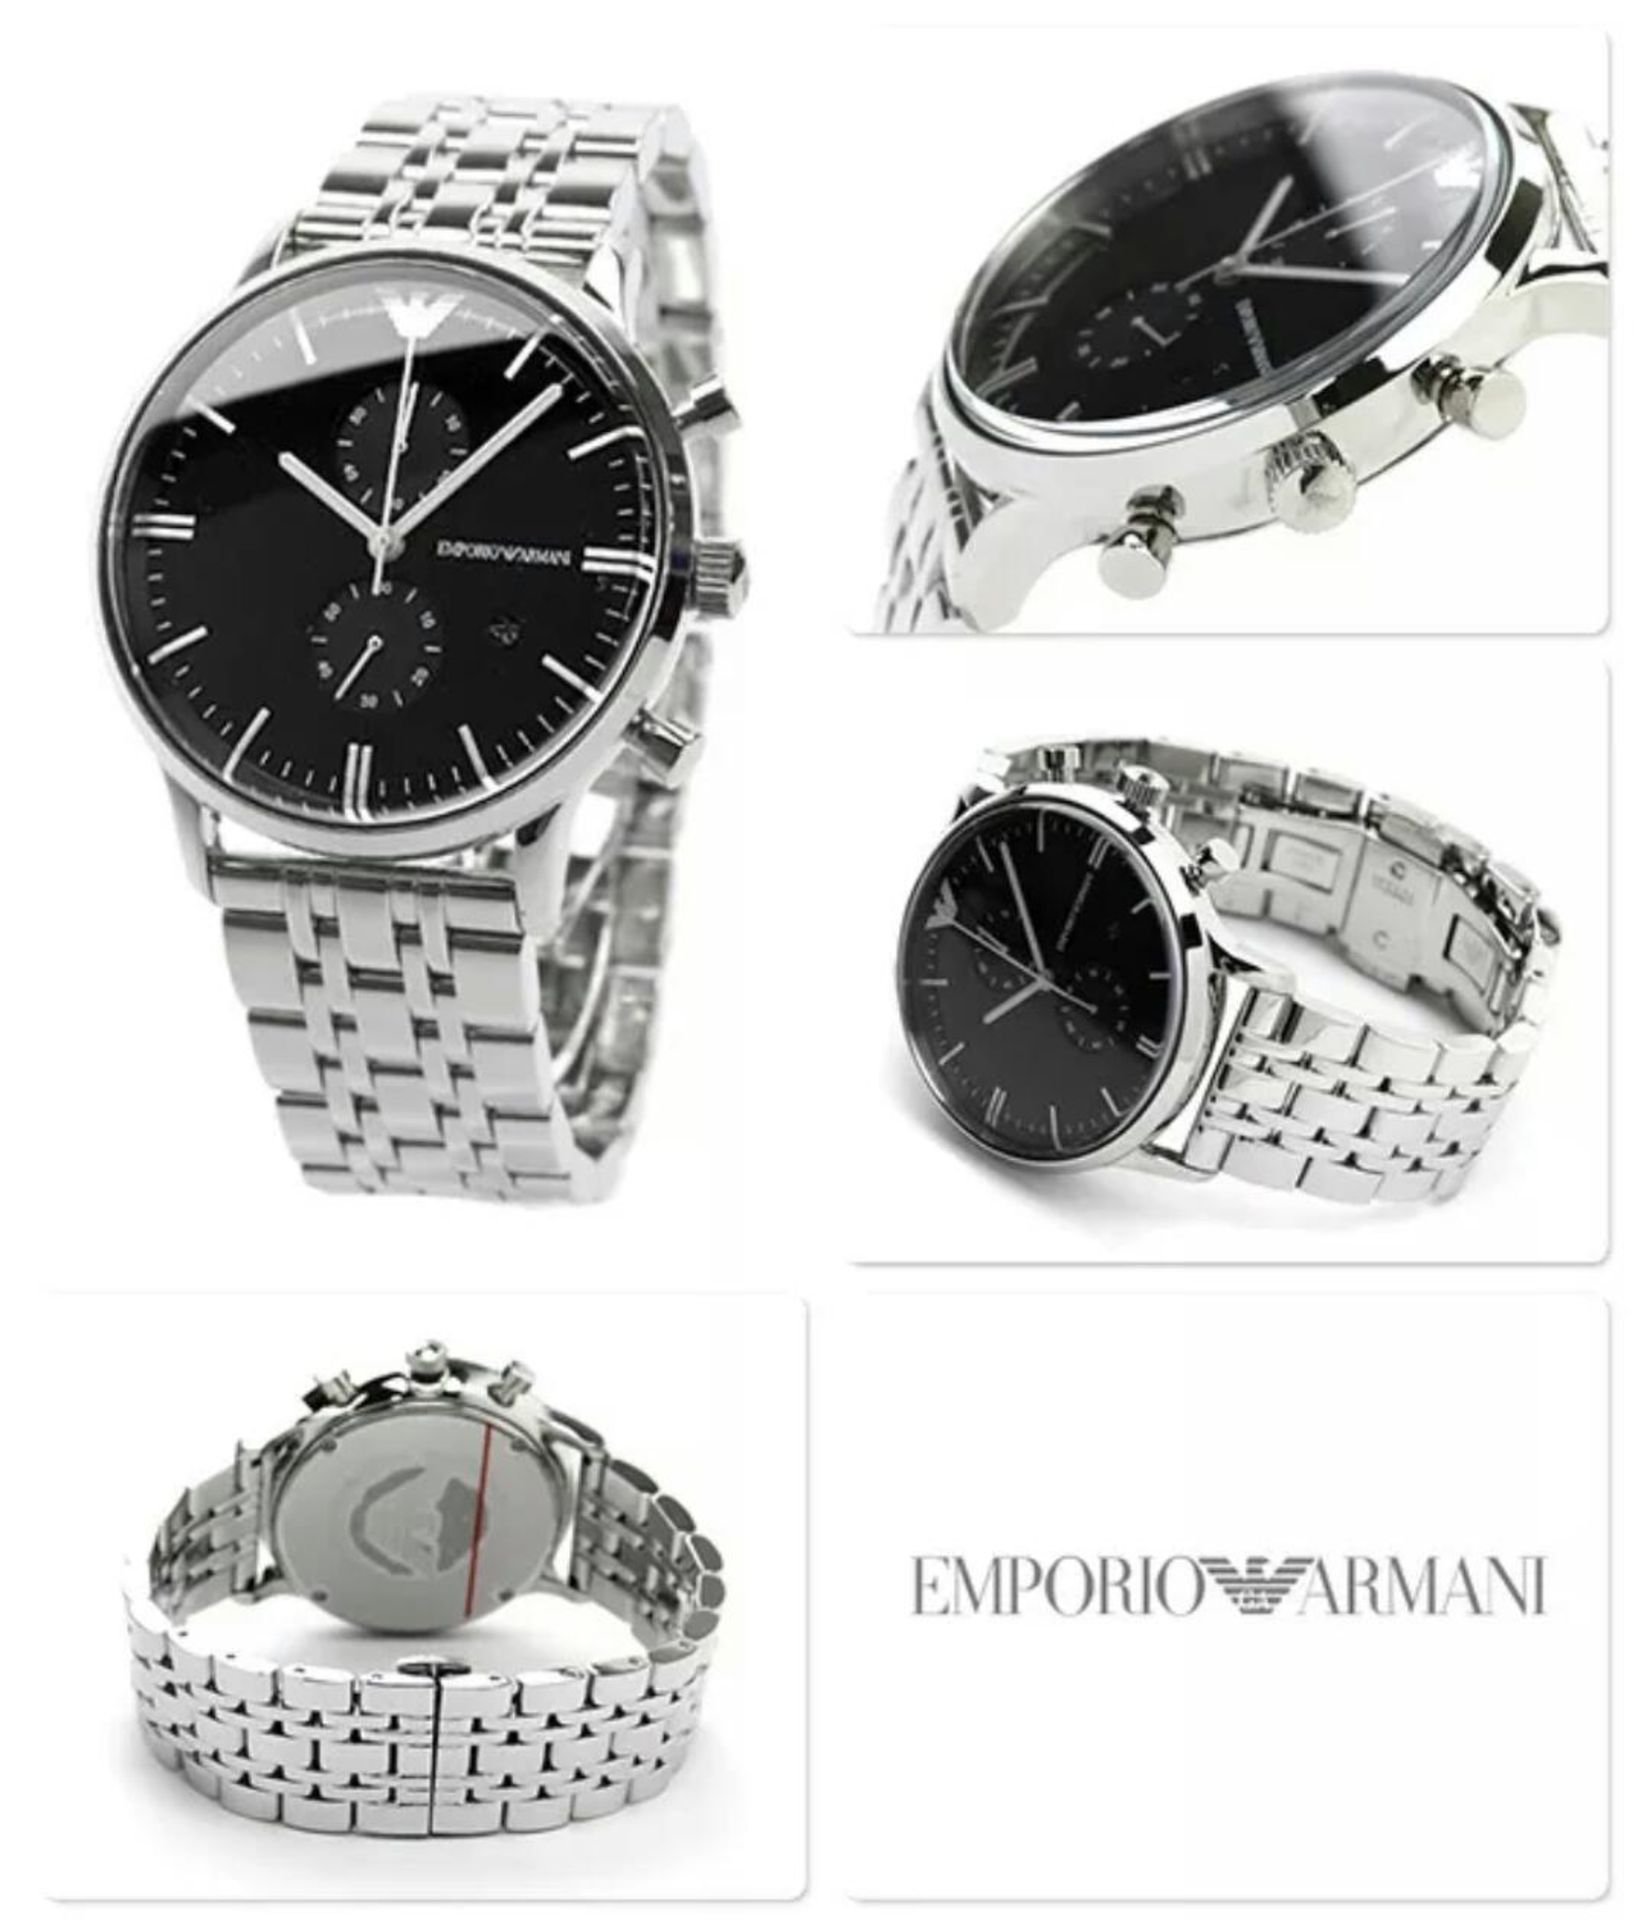 BRAND NEW EMPORIO ARMANI AR0389, GENTS POLISHED STAINLESS STEEL BRACELET WATCH, WITH A BLACK